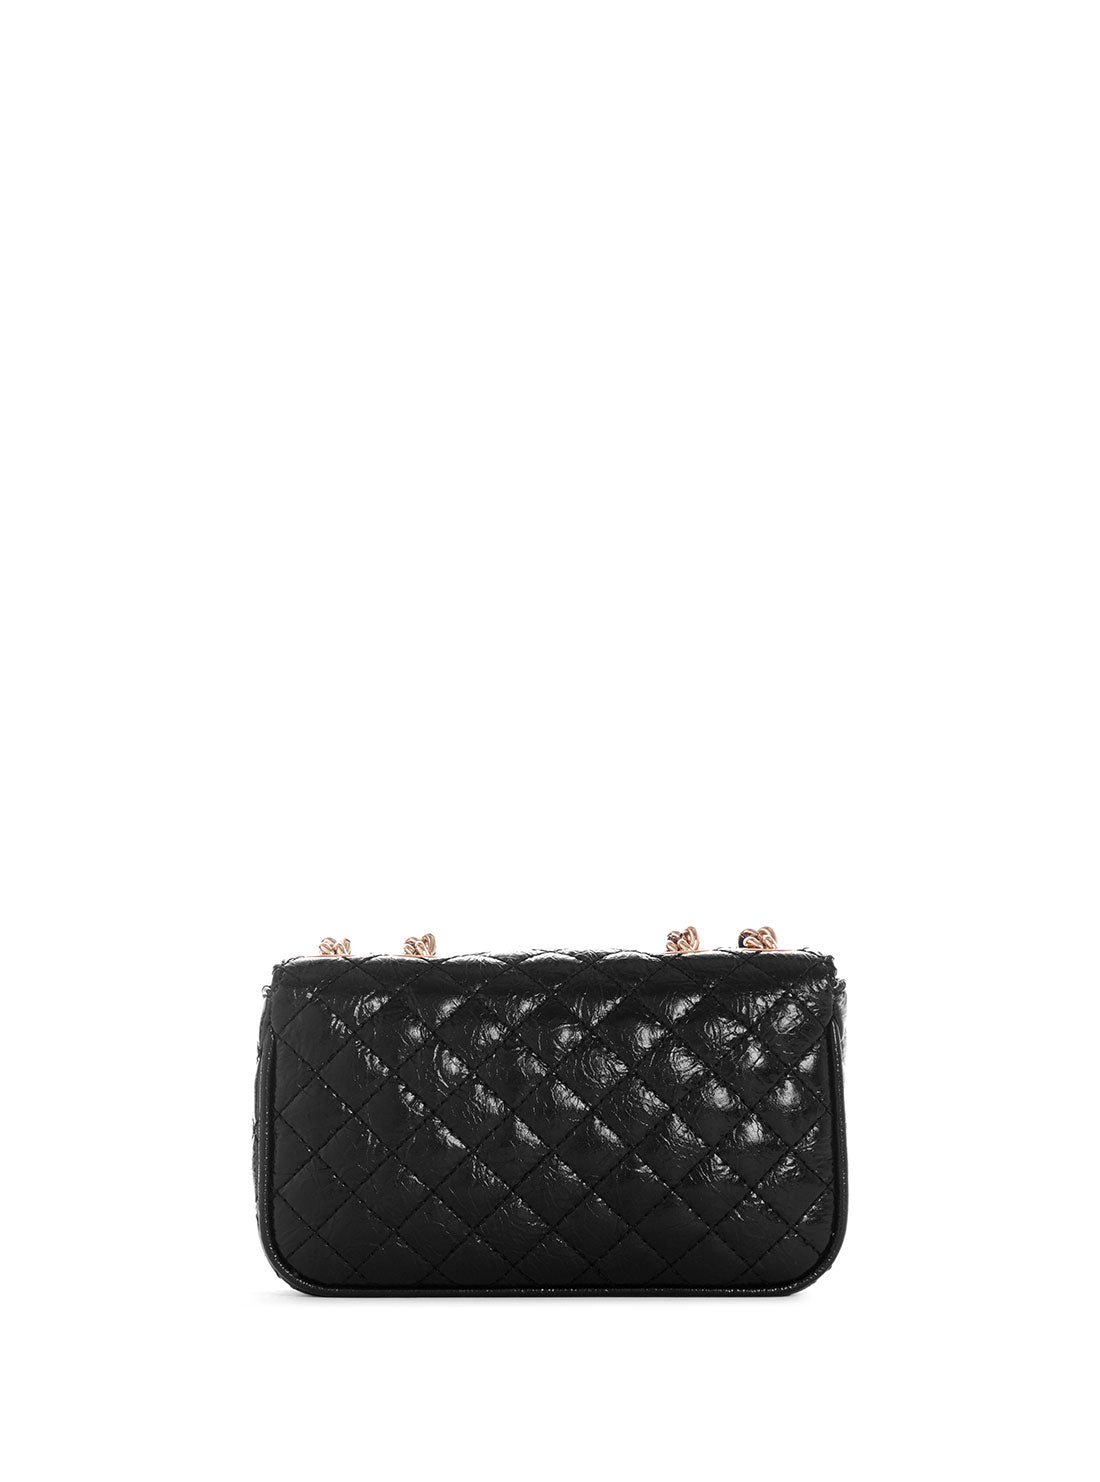 GUESS Women's Black Spark Quilted Mini Crossbody Bag QG870078 Back View